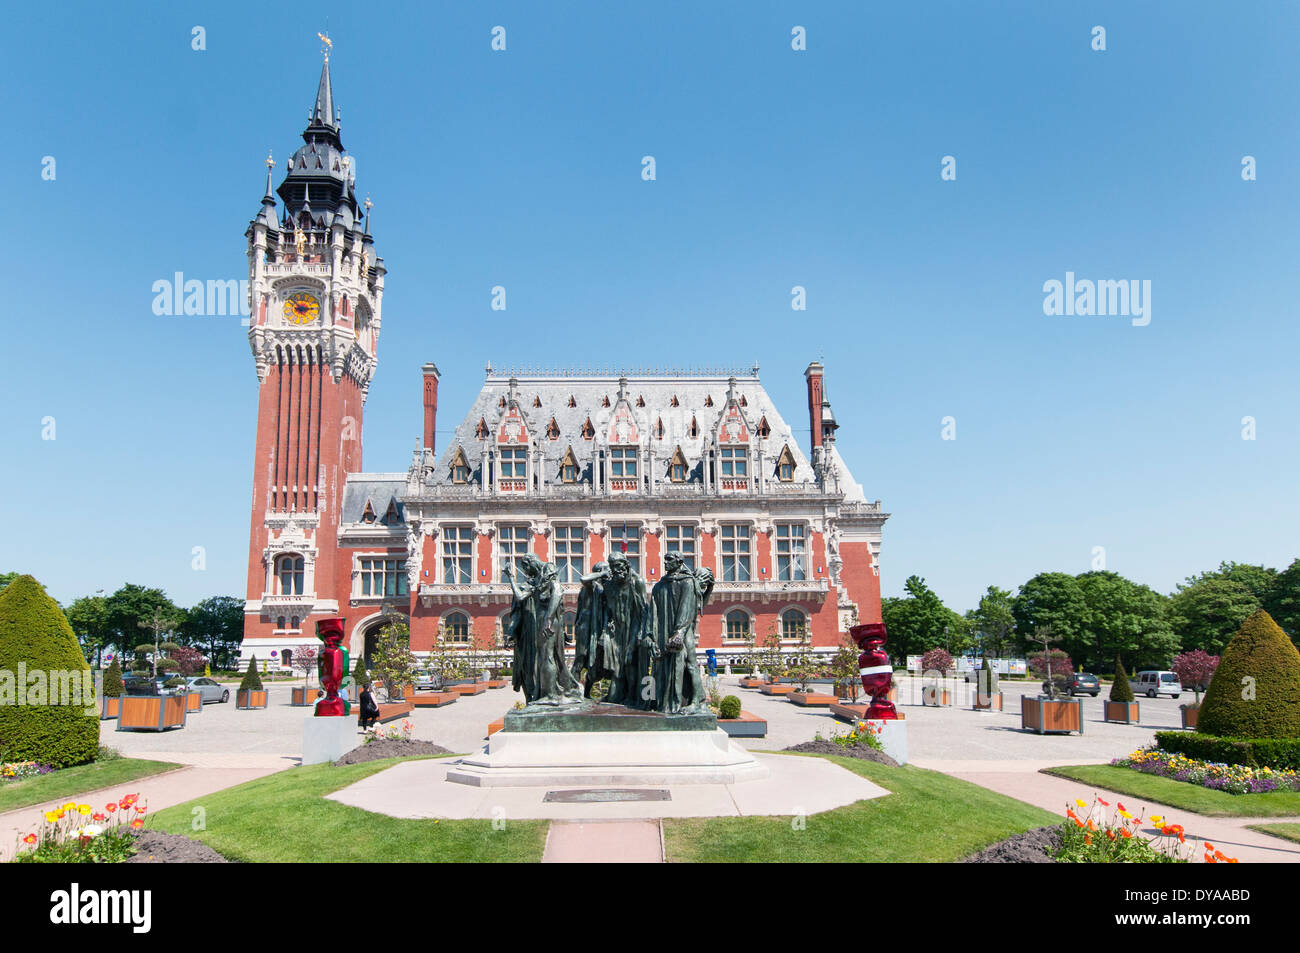 France, Calais. The six Burghers of Calais by Rodin stands in front of the Town Hall and belfry, designed by Louis Debrouwer. Stock Photo